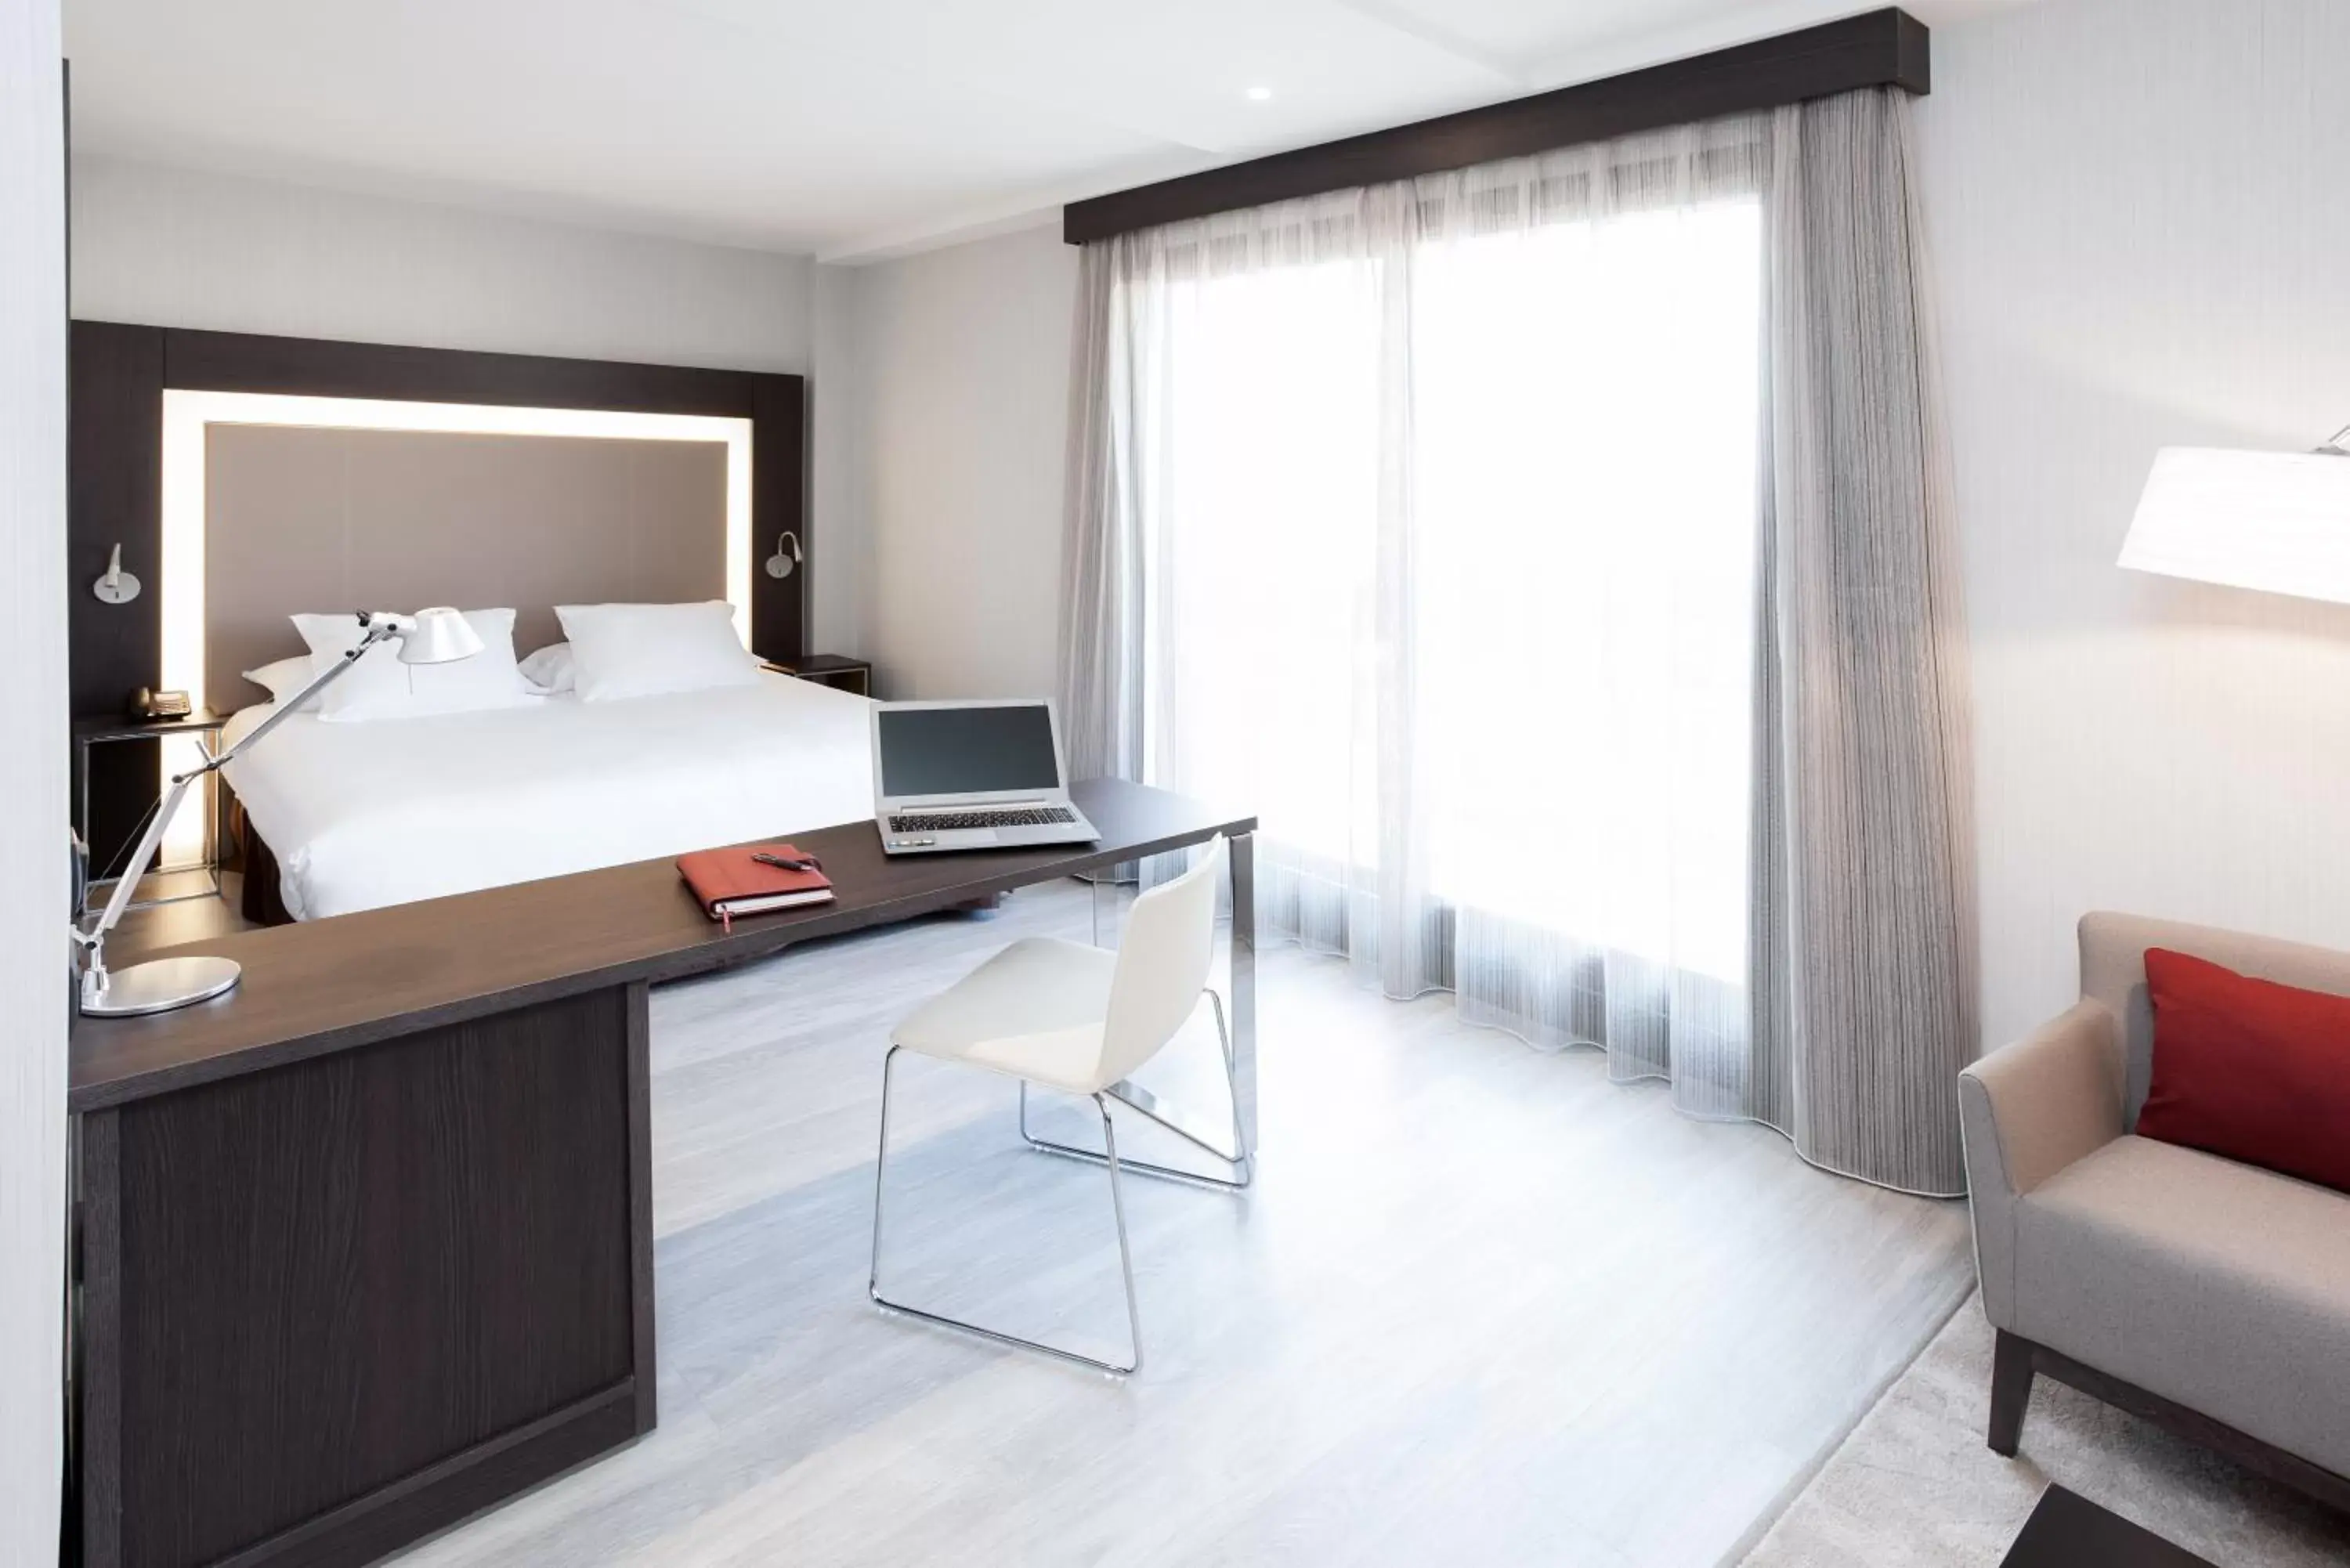 Executive Queen Room with Terrace in Novotel Madrid Center